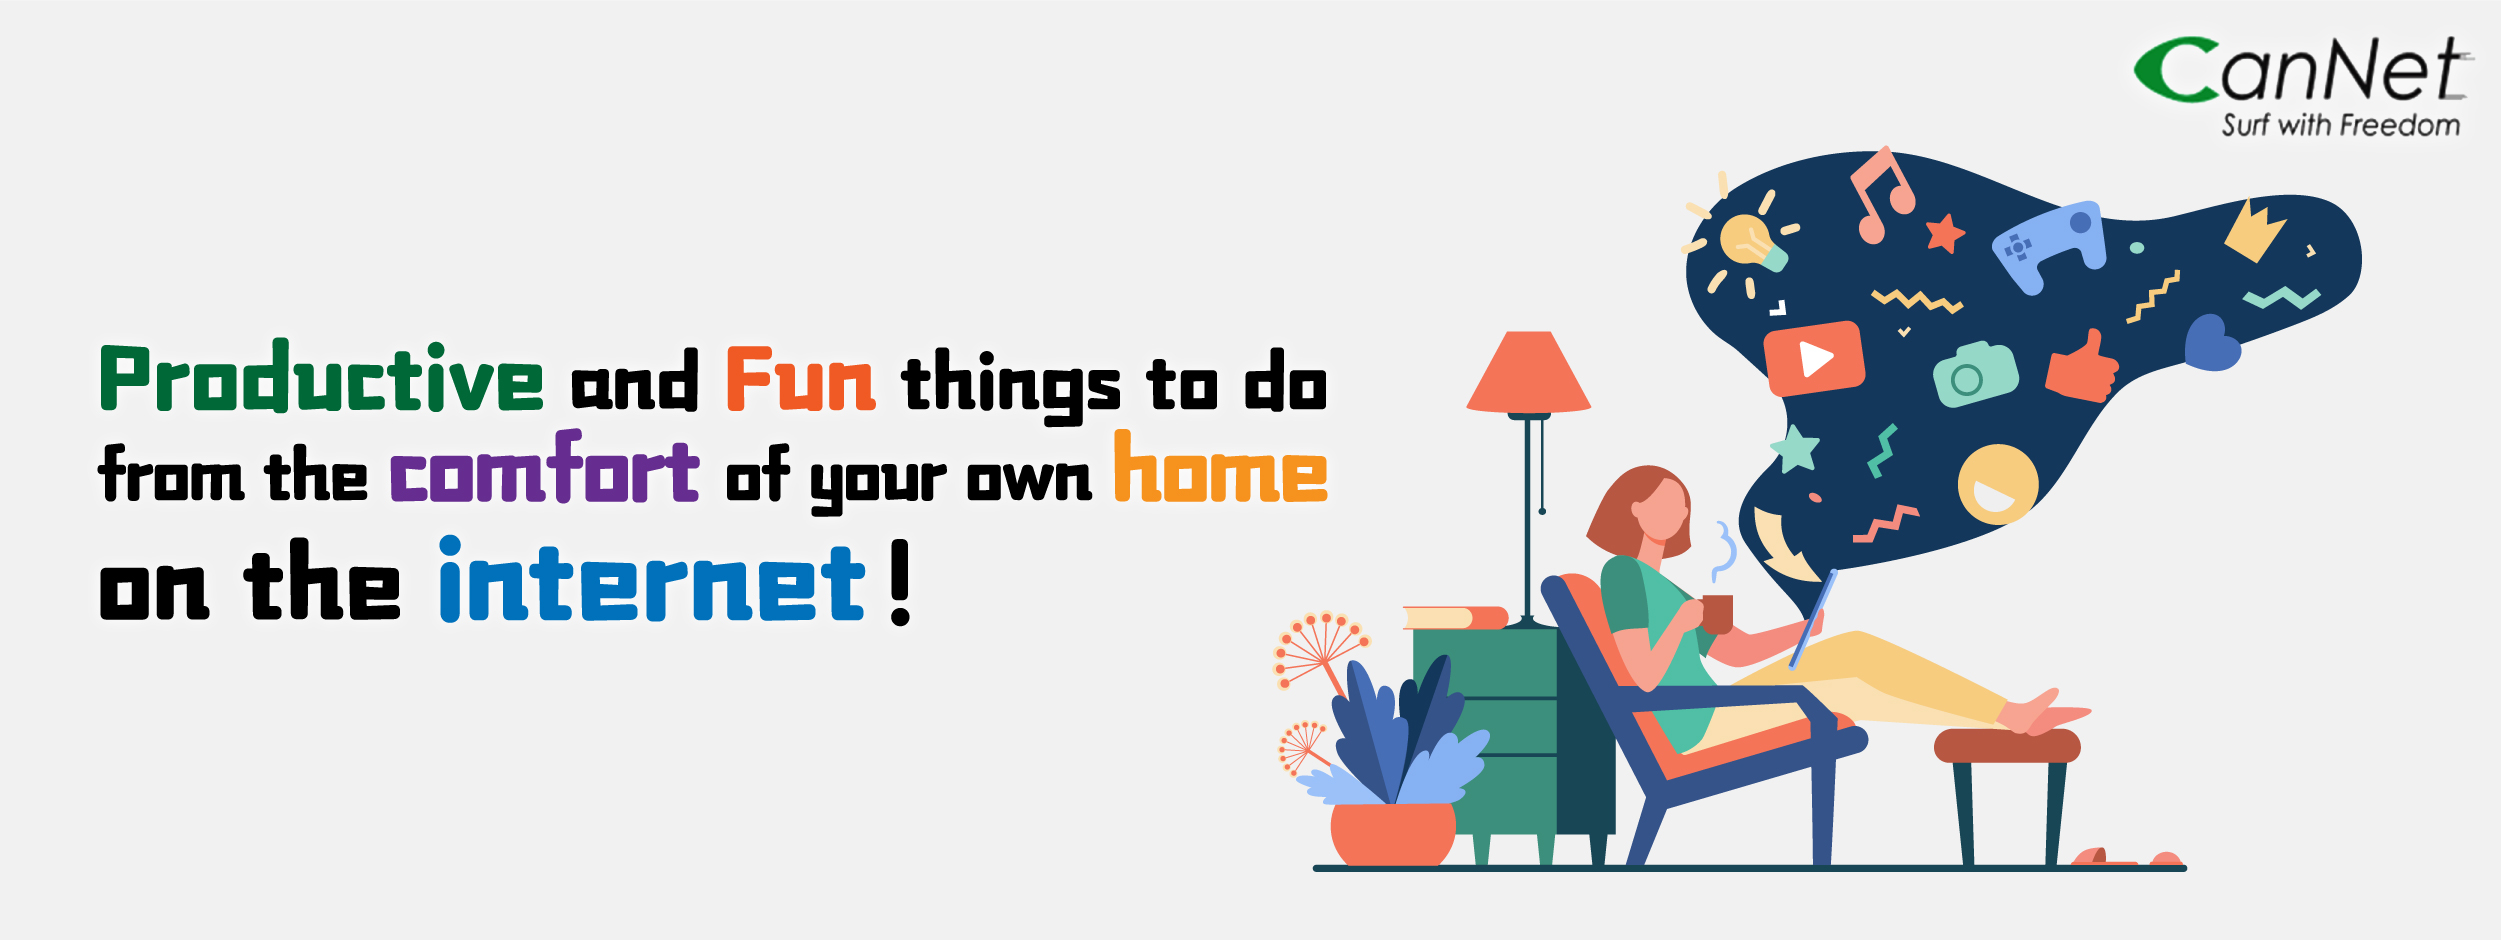 Productive and Fun things to do from the comfort of your own home on the internet!